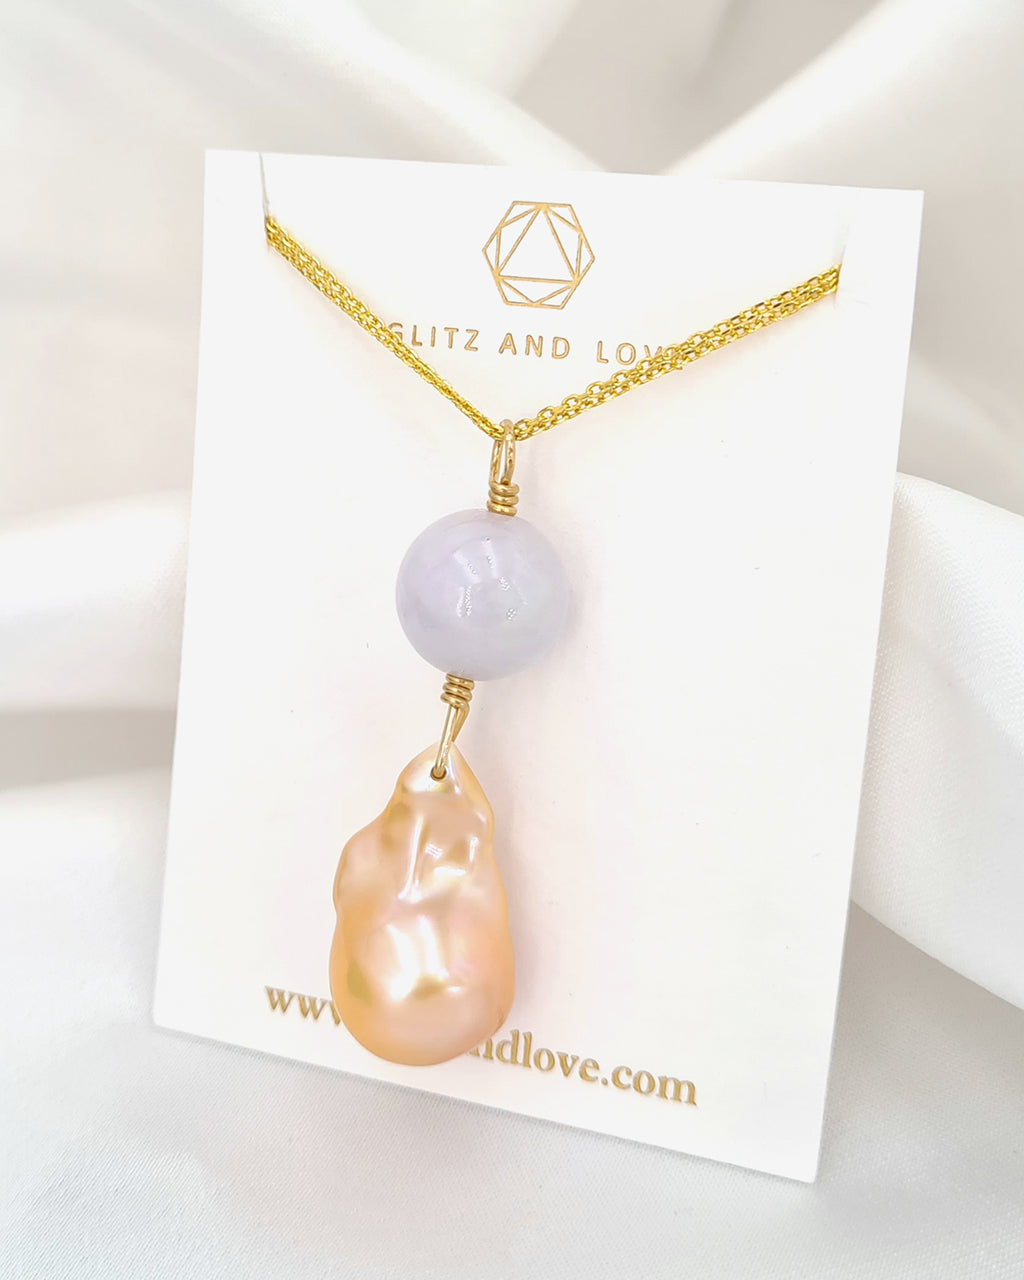 Golden Baroque Pearl & Jade Gold Necklace - Minimalist & Elegant - Wedding Bridal Jewelry for Brides and Bridesmaids | Singapore